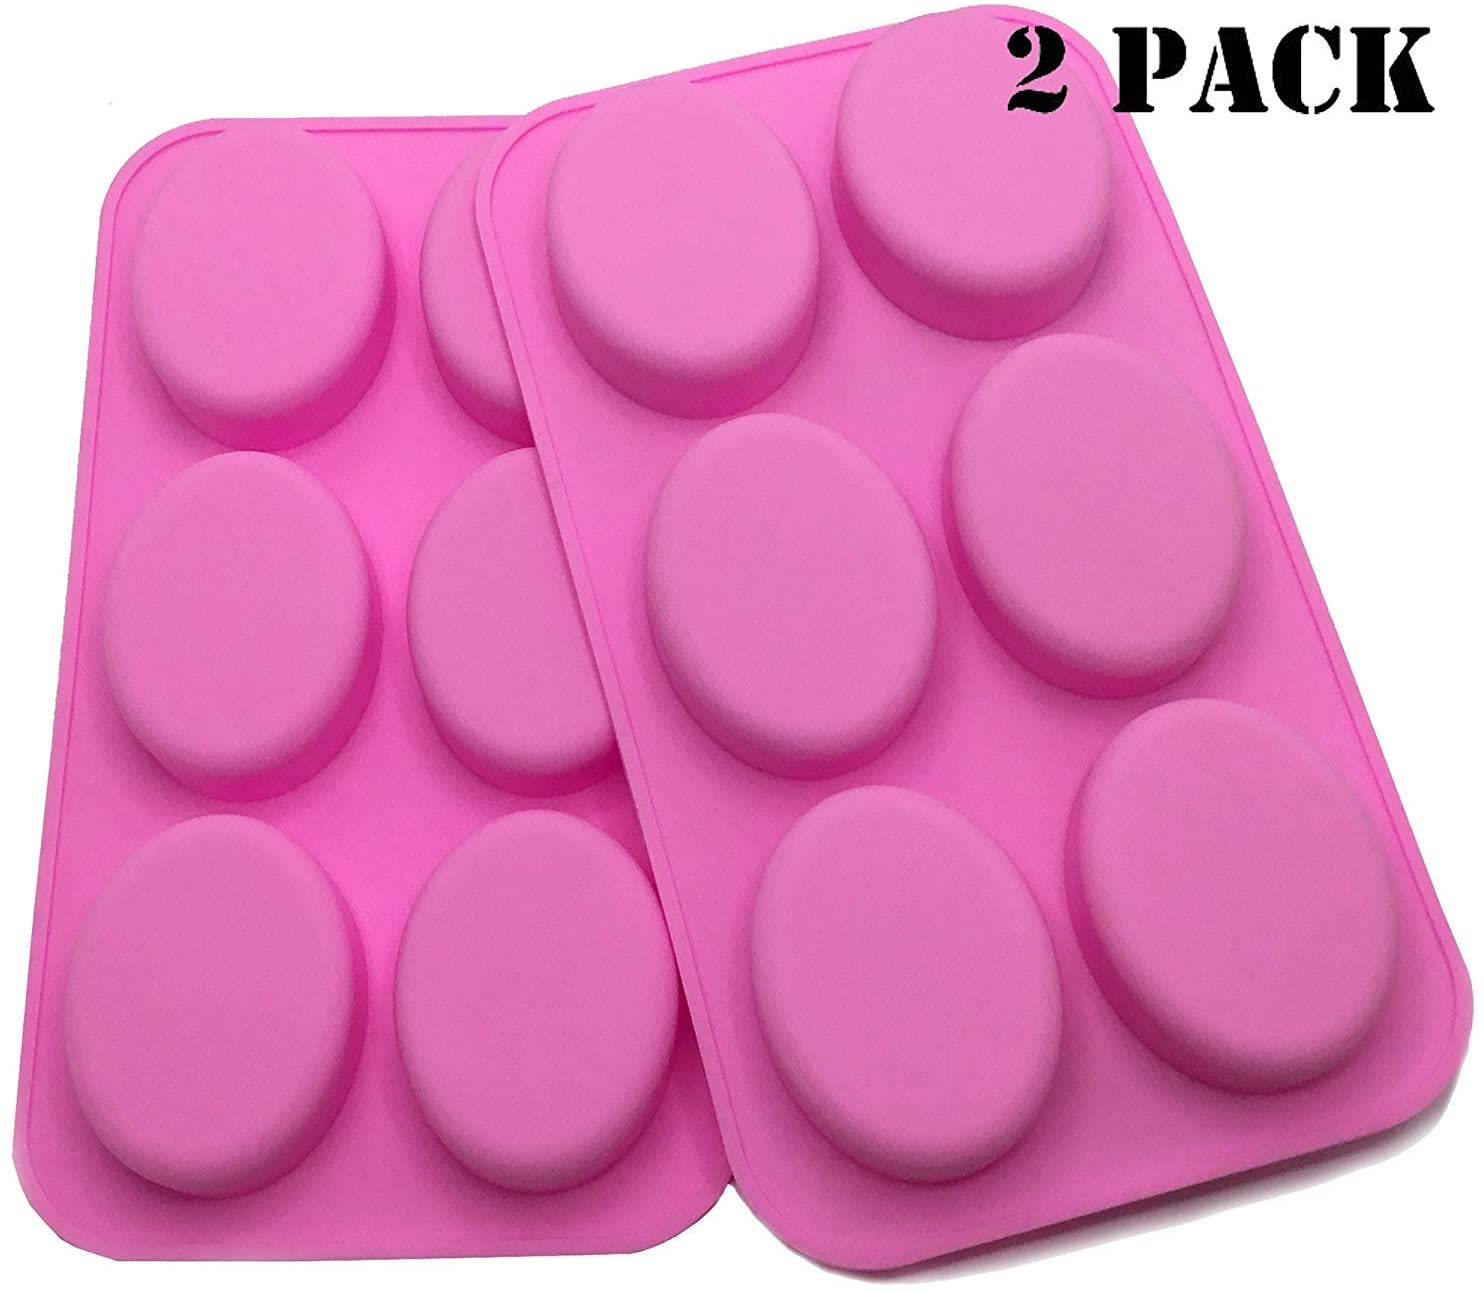 Silicone Soap Moulds 6 Cavities Handmade Soap Making Molds Rectangle Oval  Shapes Cake Bread Baking Moulds for Soap Making DIY Crafts